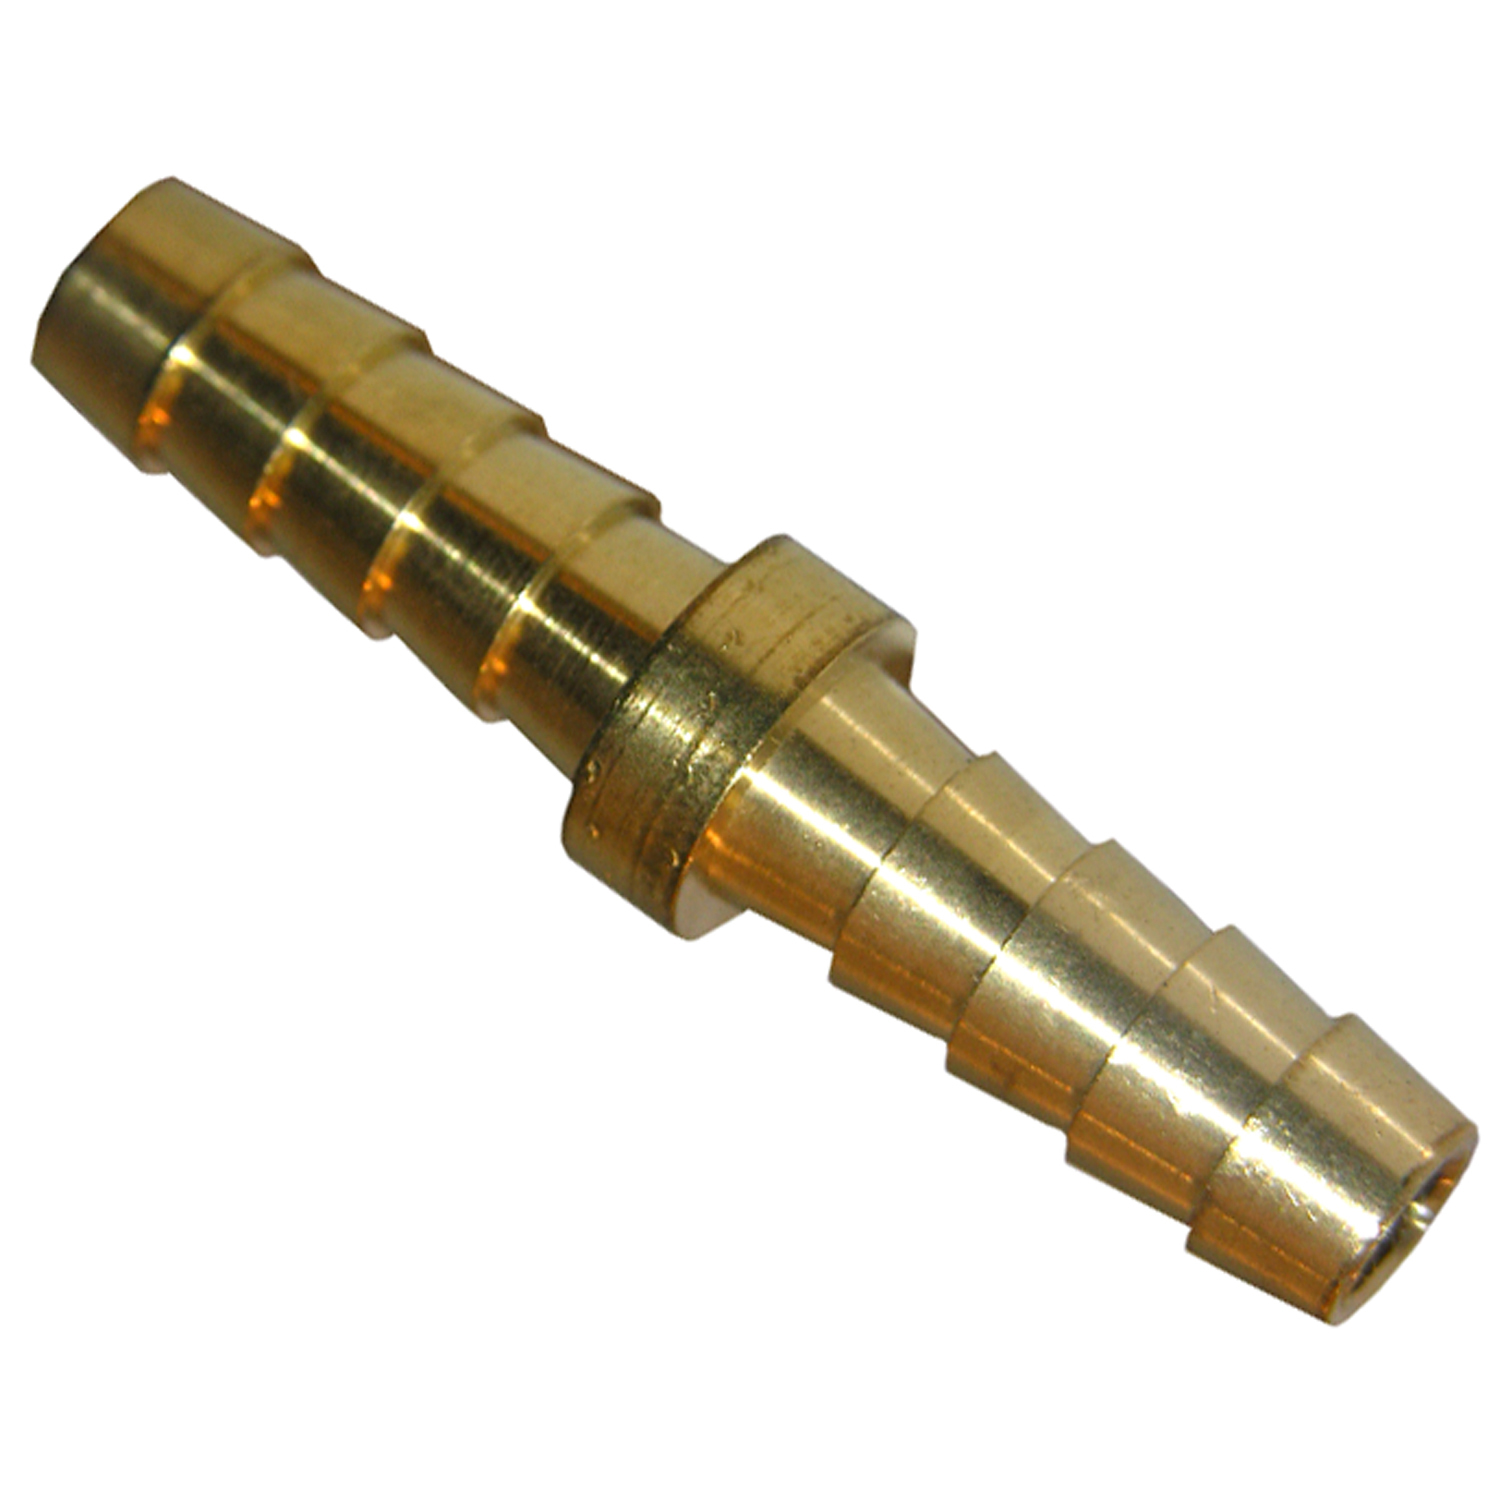 Lasco 17-7517 Coupling, 5/16 in, Barb, Brass